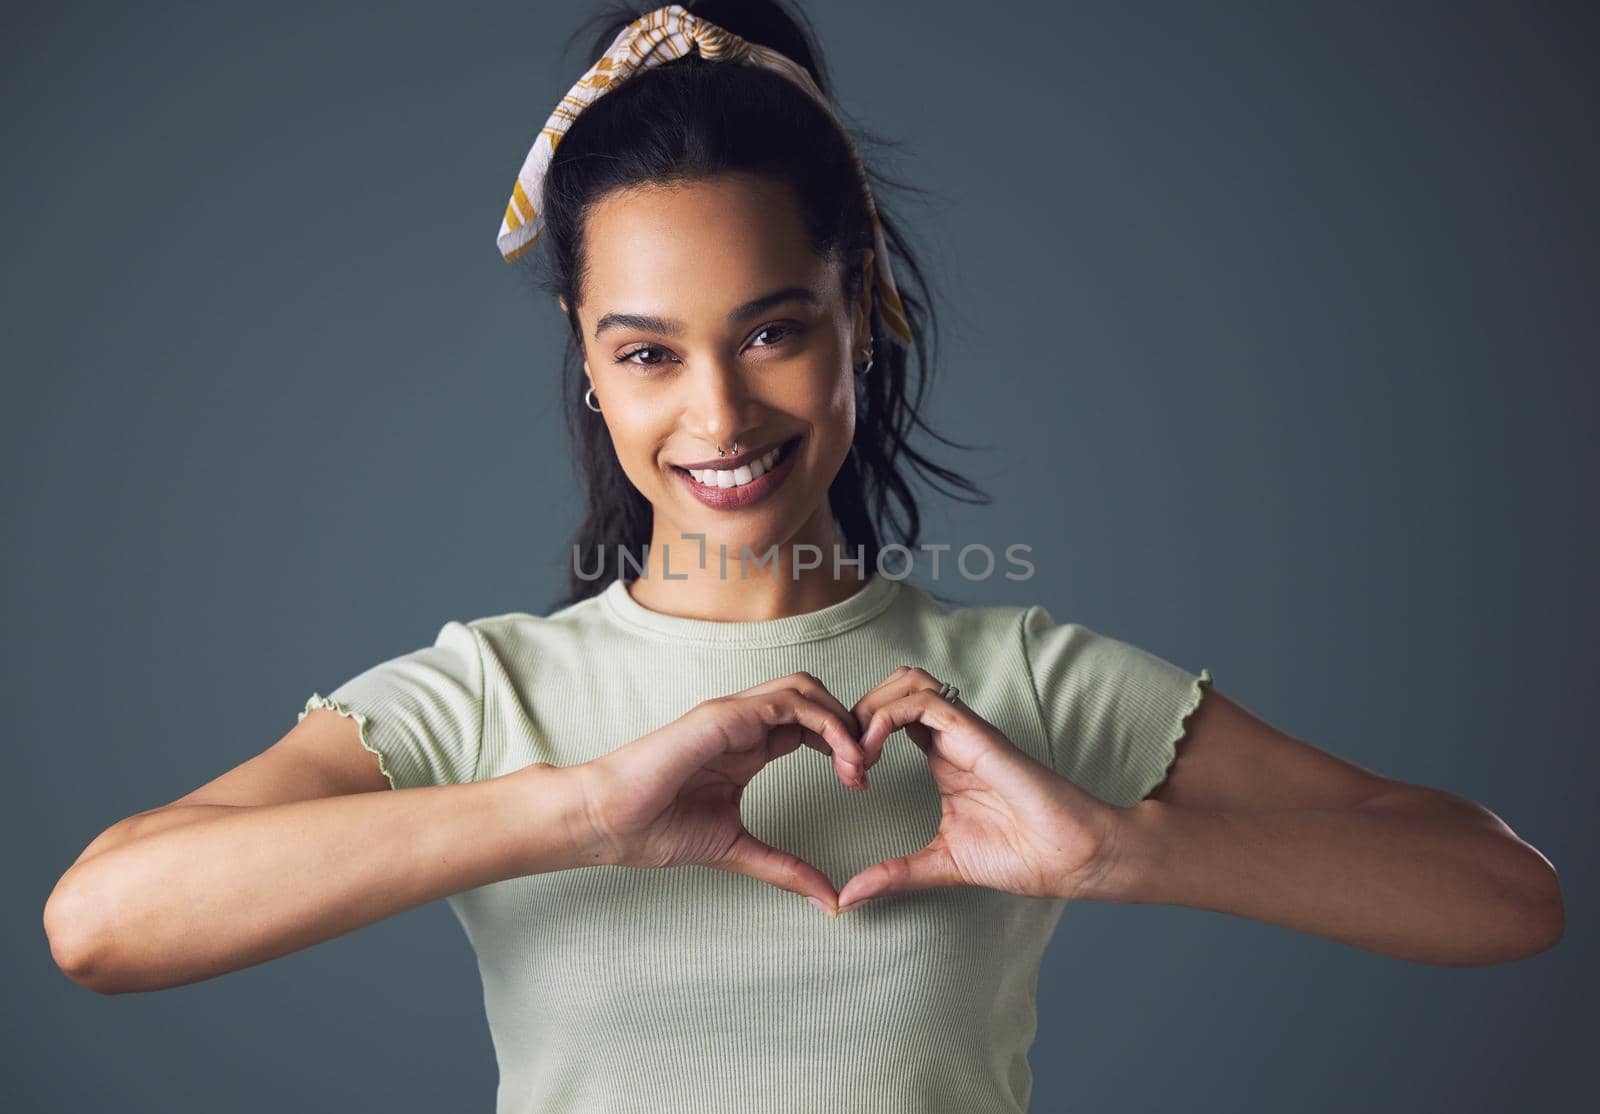 A simple I love you can make someones day. Studio shot of a young woman forming a heart shape while standing against a grey background. by YuriArcurs